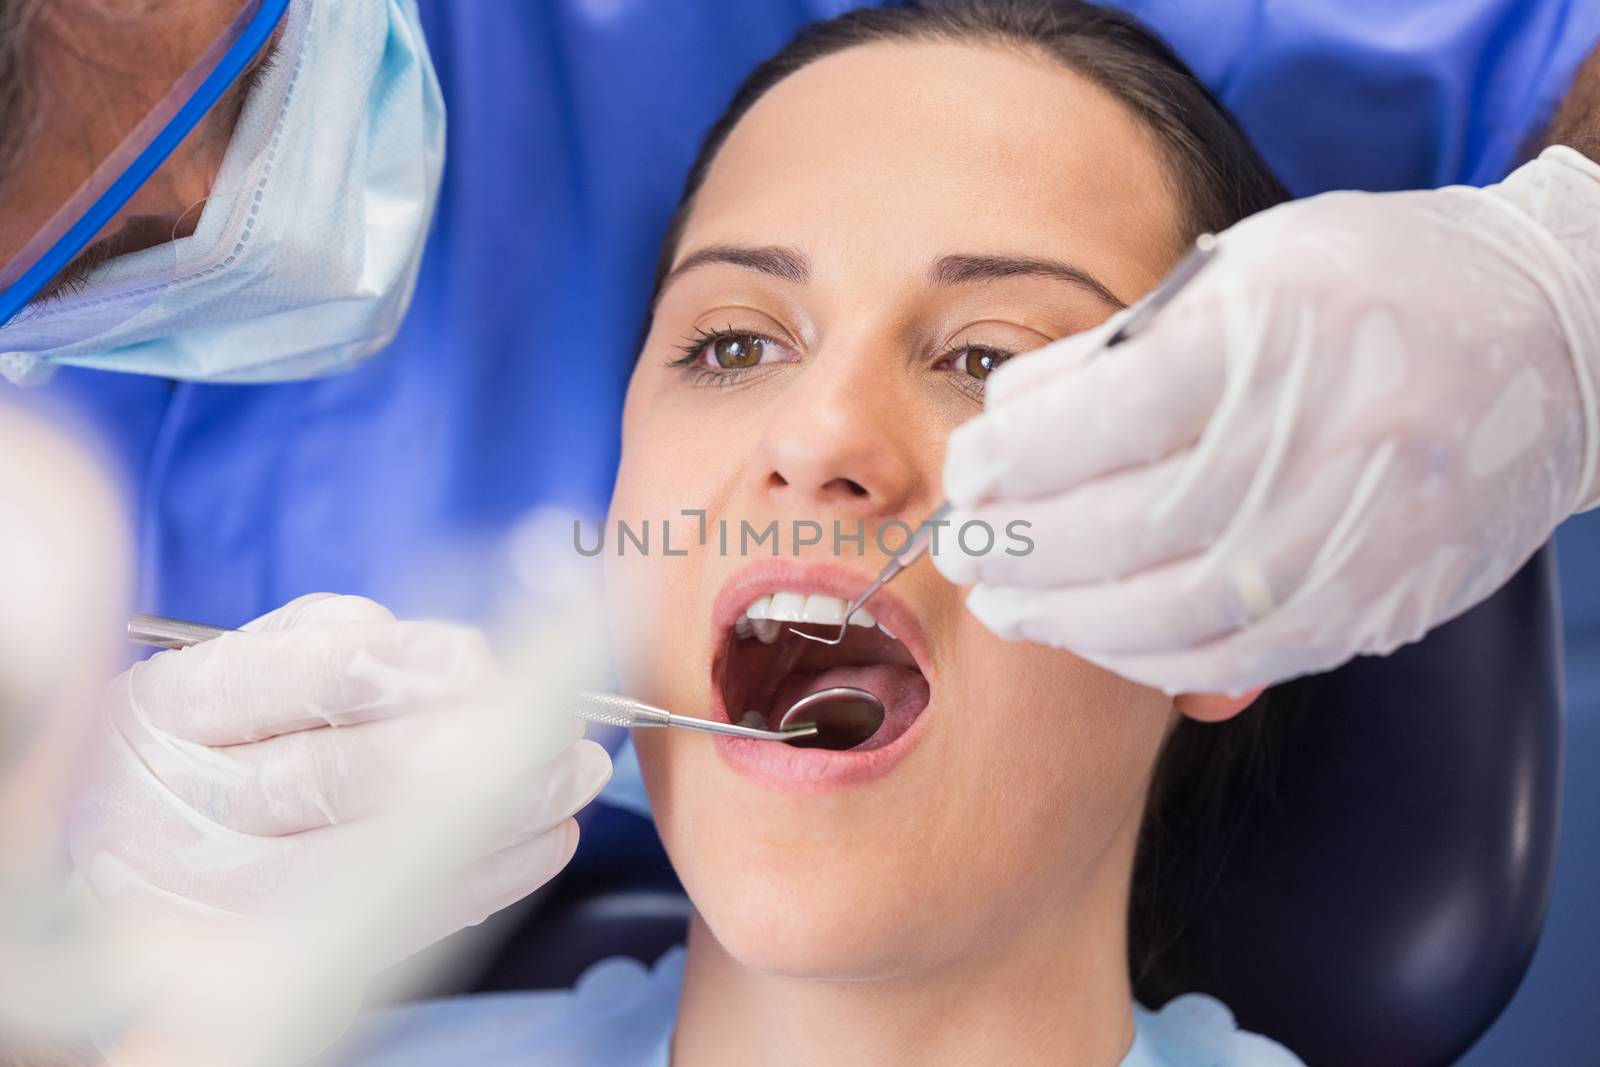 Dentist examining a patient with angle mirror and sickle probe by Wavebreakmedia